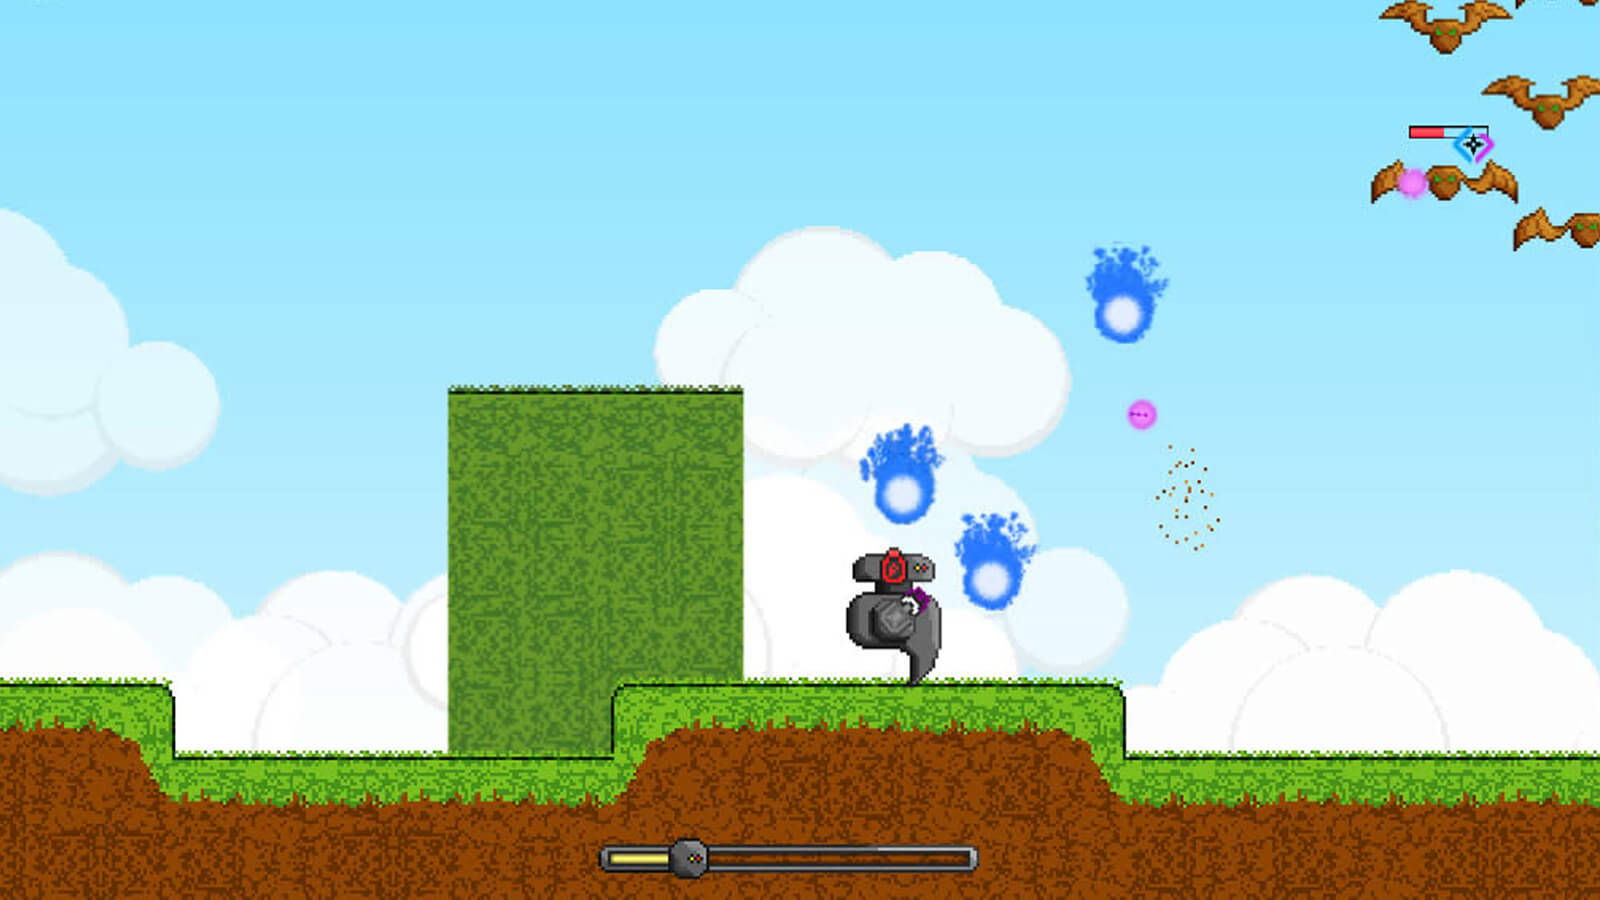 The player's robot character fires magenta bullets as enemy bats shoot back blue balls of fire